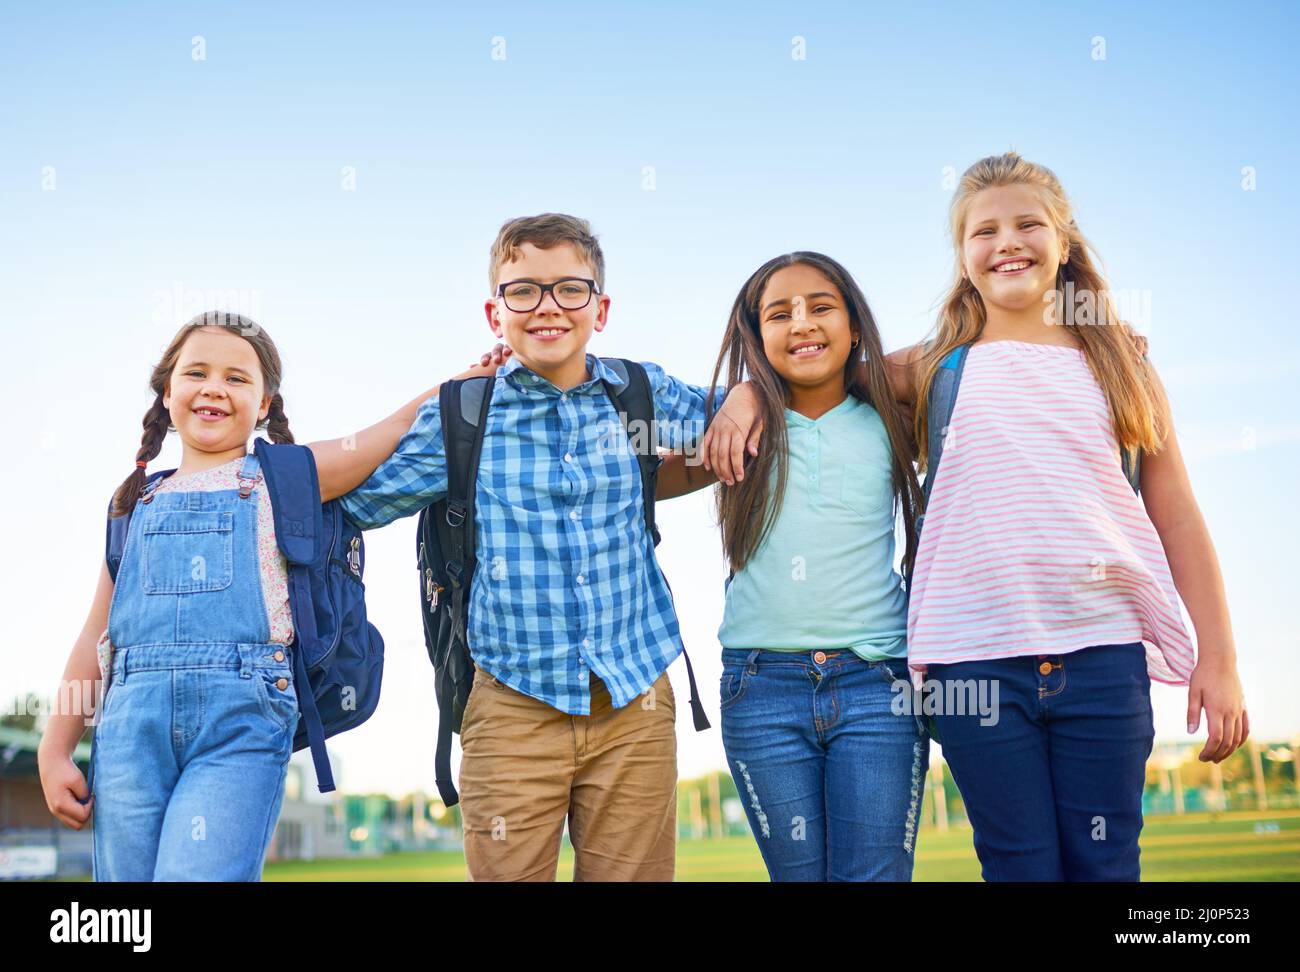 Friends make everything fun. Shot of a group of elementary school children together. Stock Photo